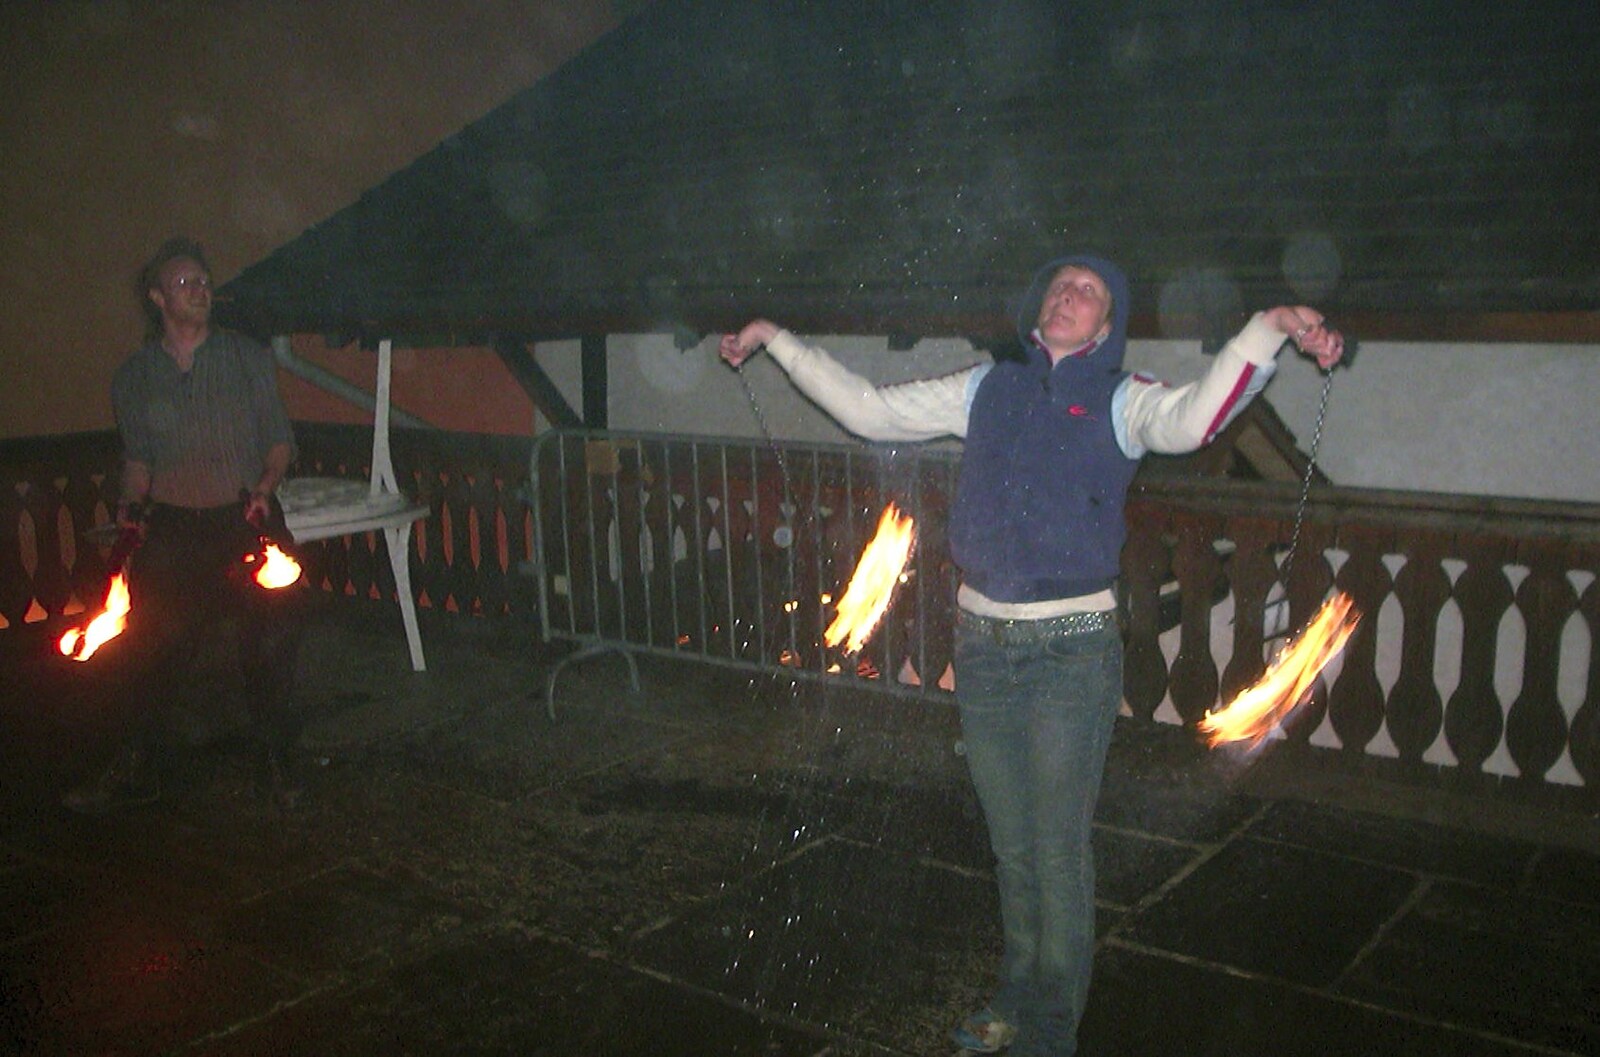 We pass some fire jugglers from 3G Lab Goes Skiing In Chamonix, France - 12th March 2002